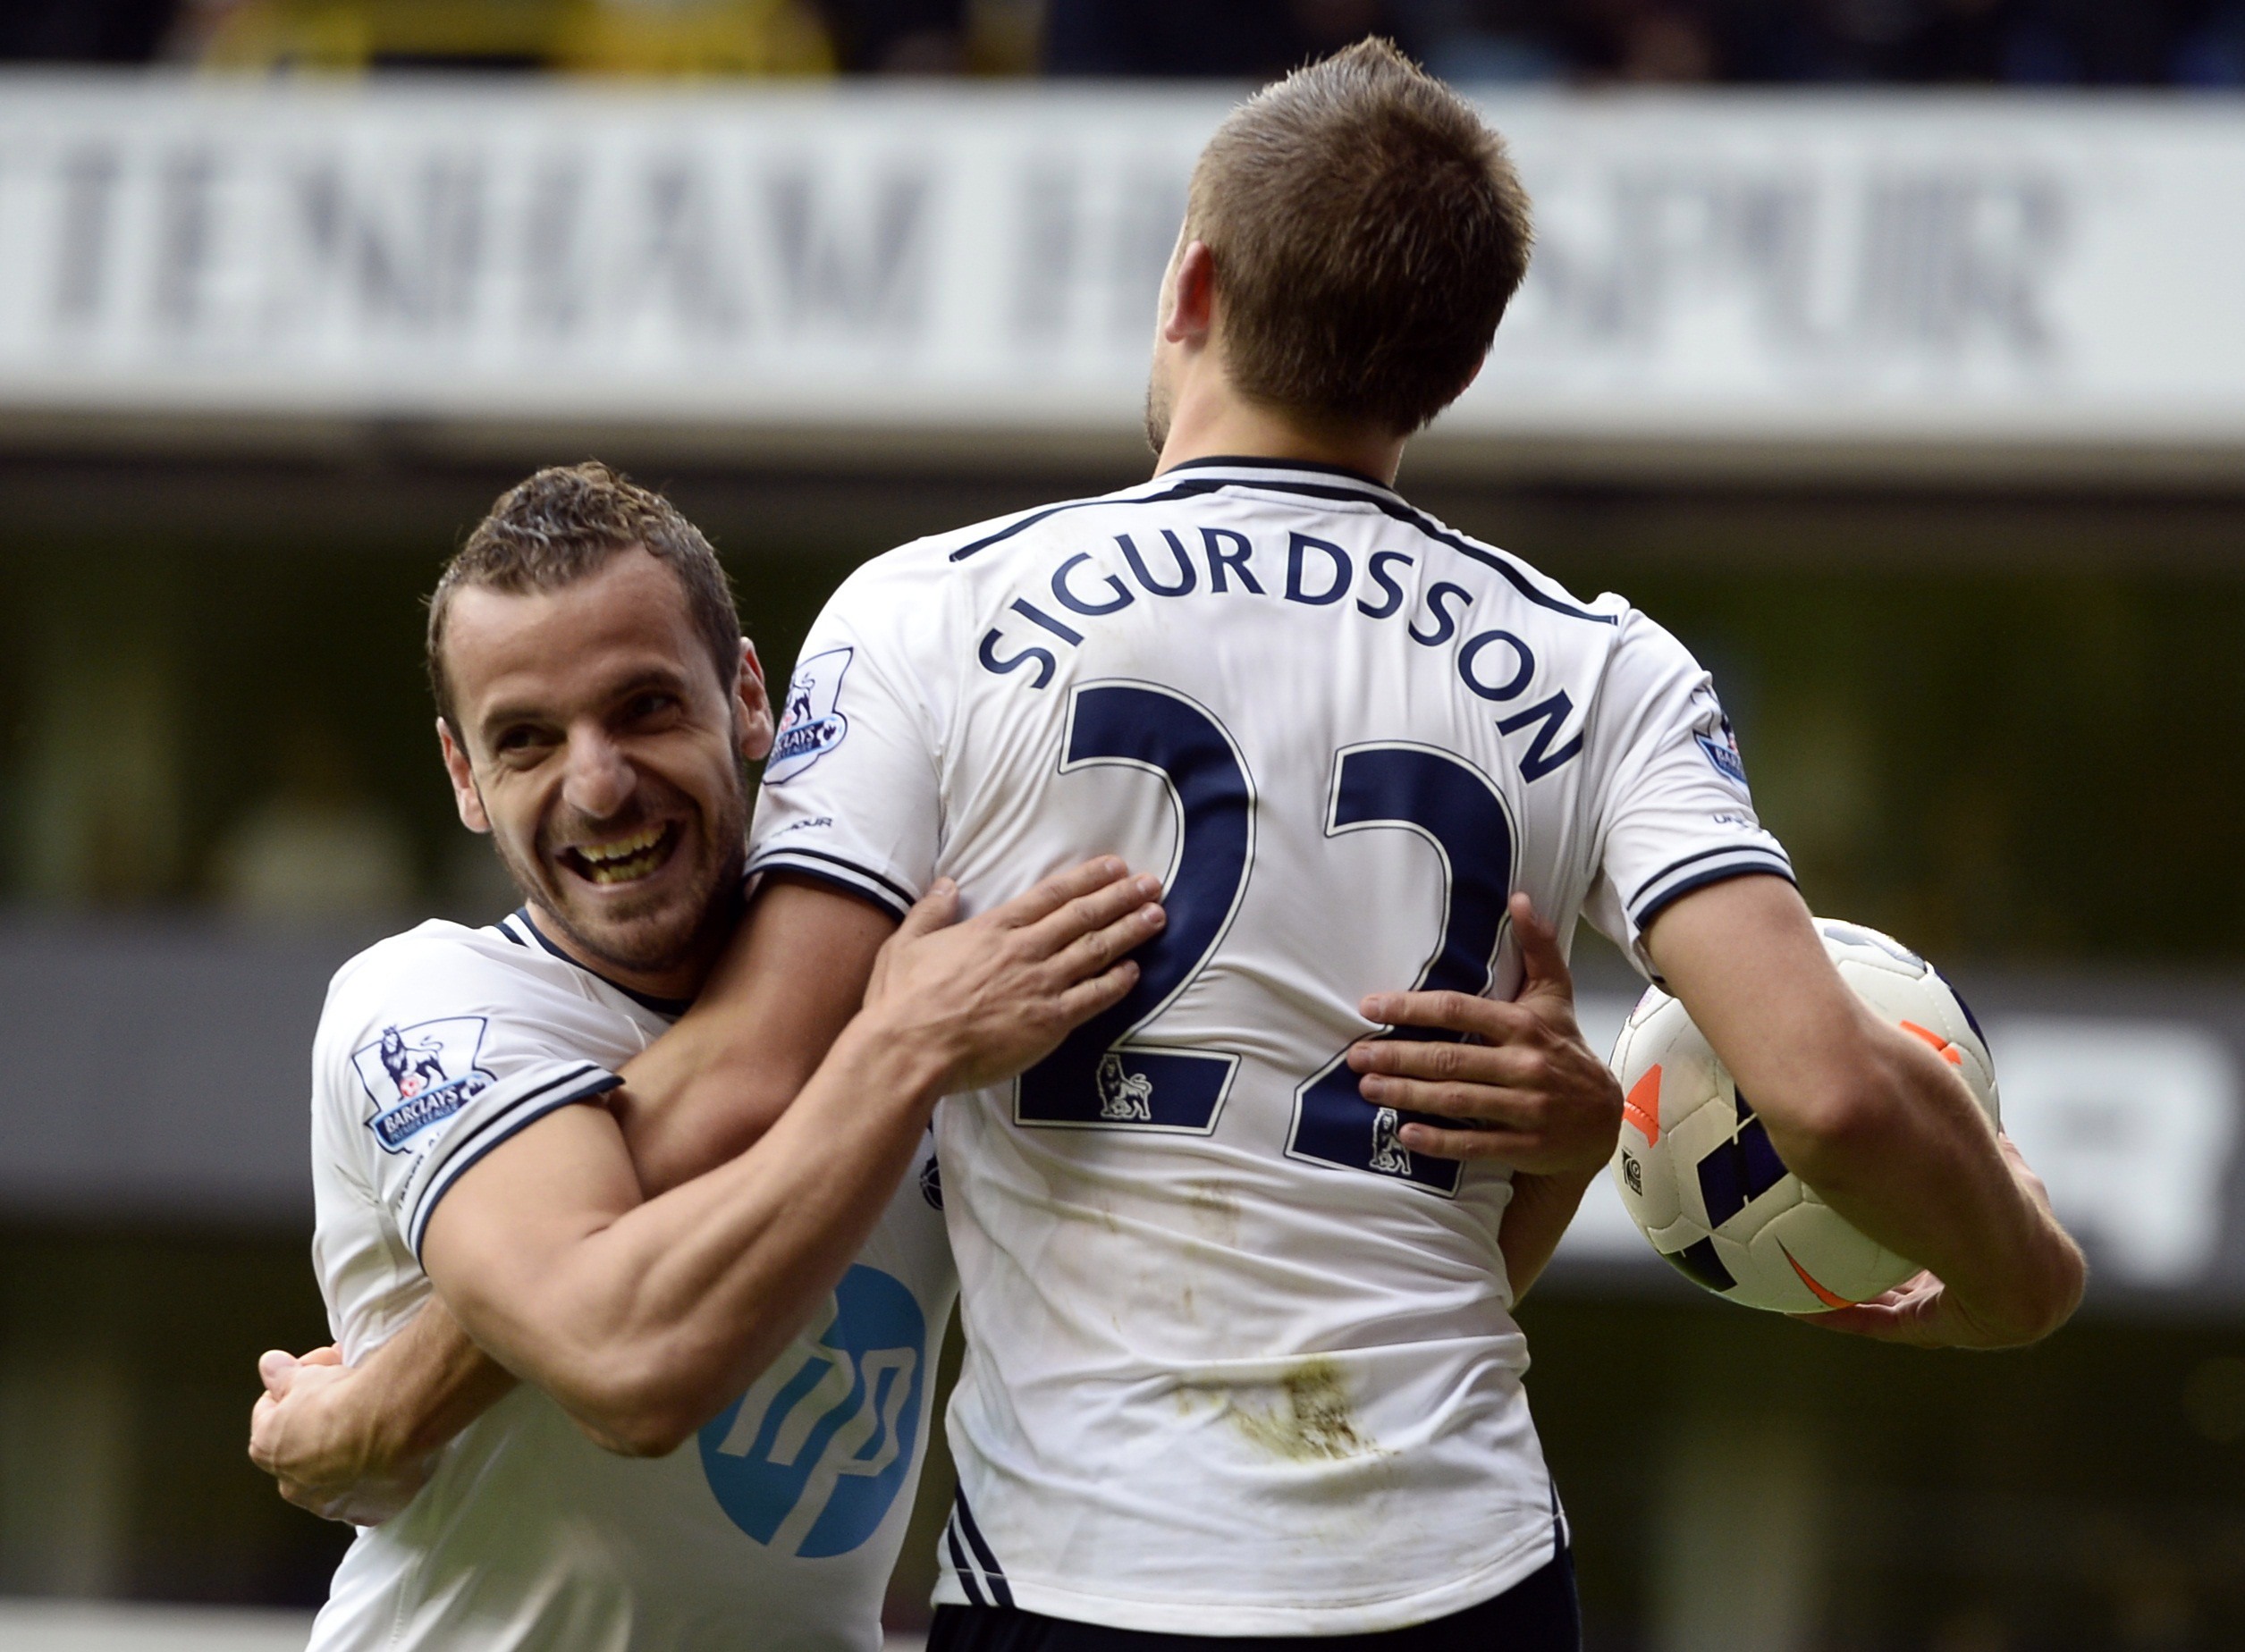 Tottenham Hotspur's Soldado celebrates with team mate Sigurdsson after Sigurdsson scored a second goal during their English Premier League soccer match against Norwich City in London